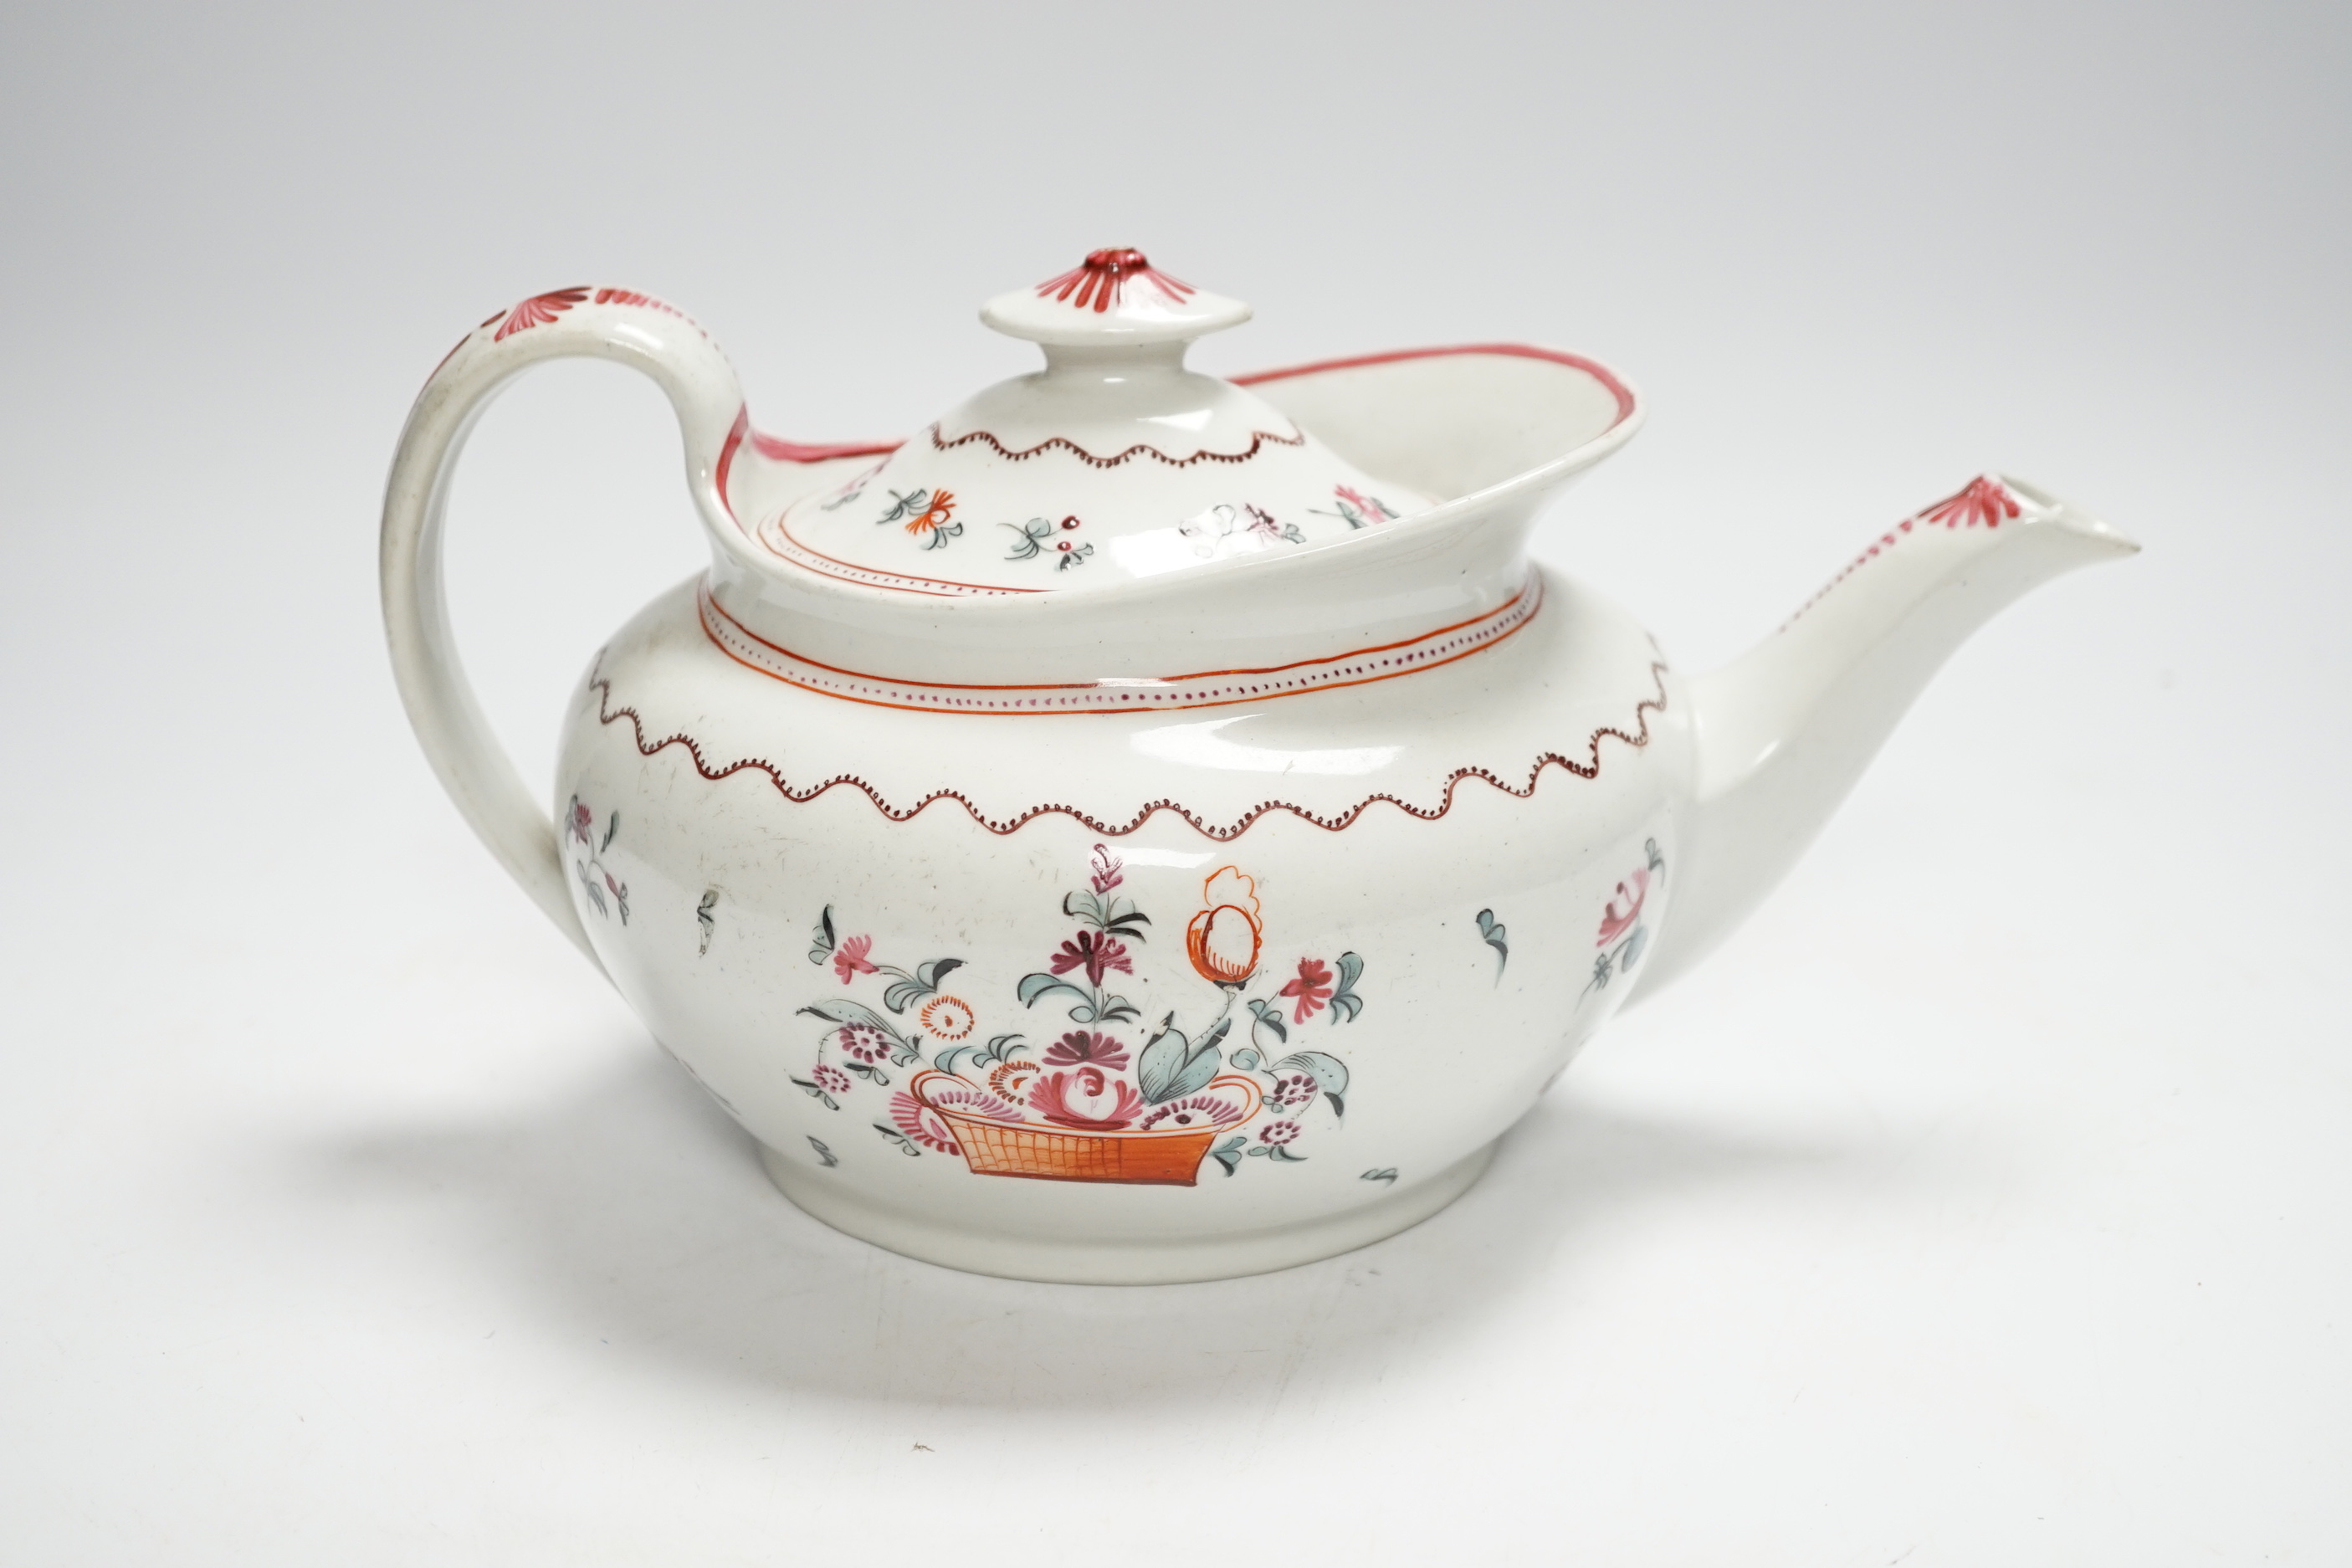 A Newhall porcelain boat shaped teapot, c.1800 with floral decoration, 25cm wide